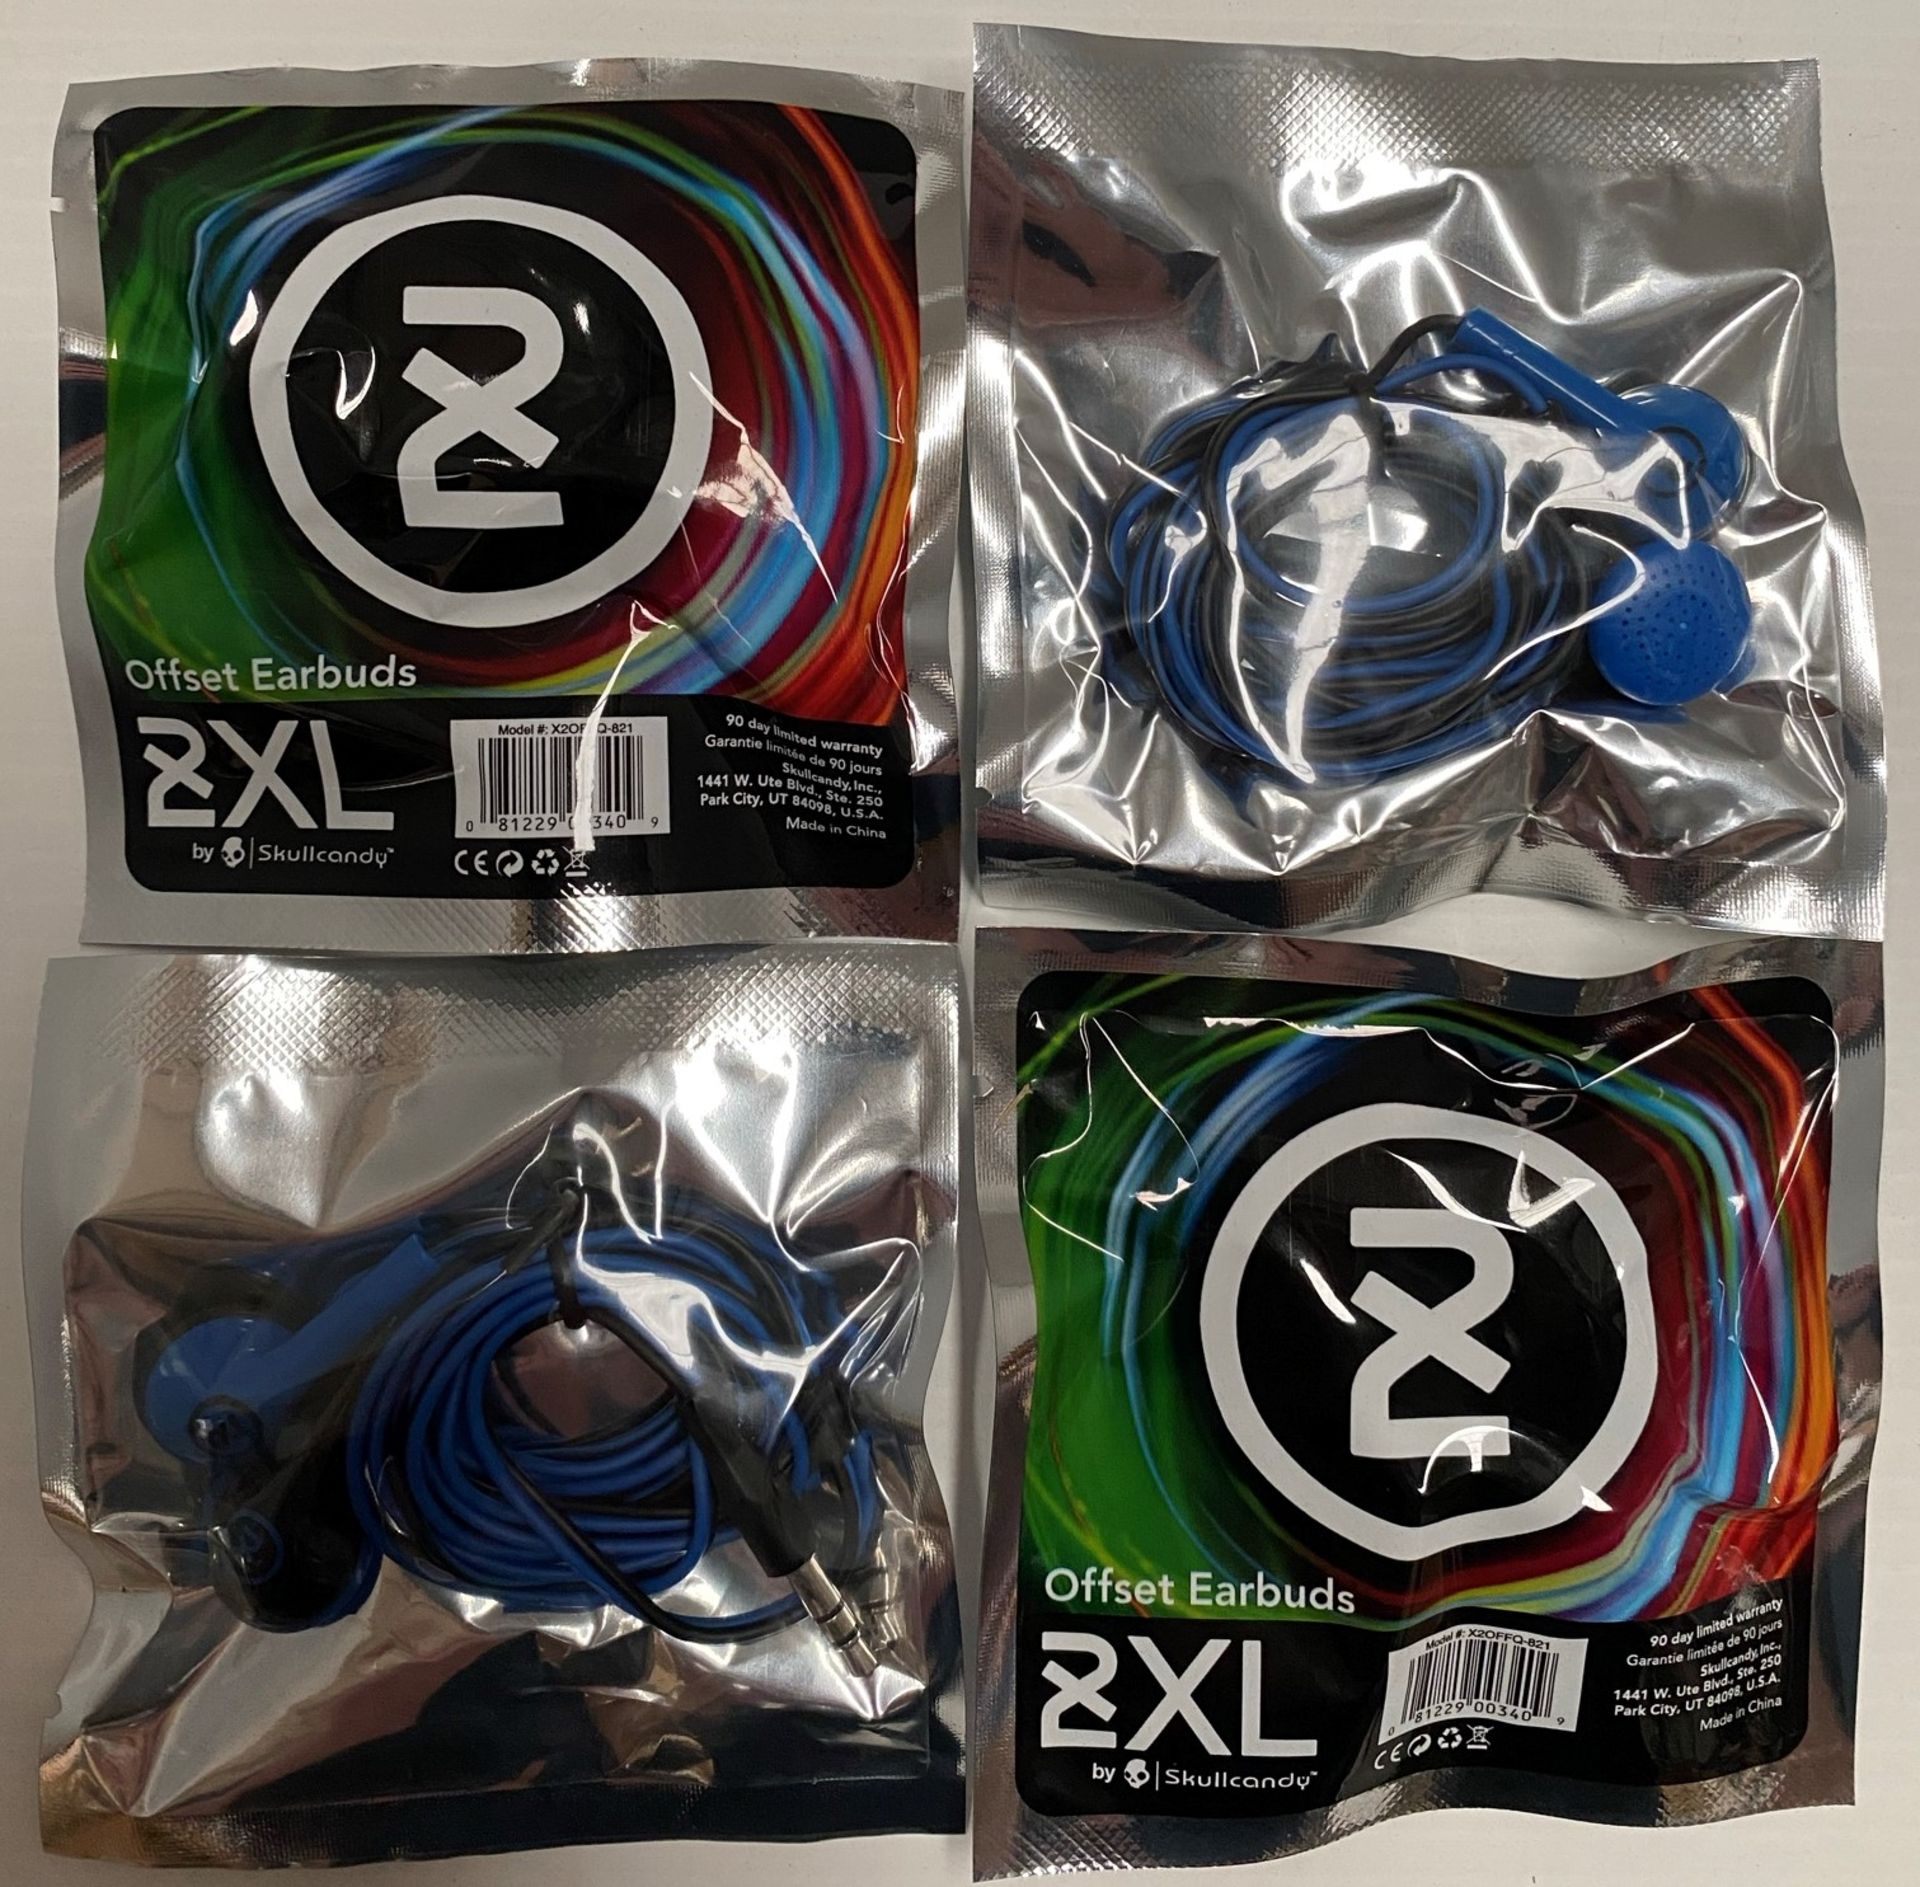 100 x 2XL Offset Earbuds/headphones by Skullcandy (4 inner bags) - black and blue